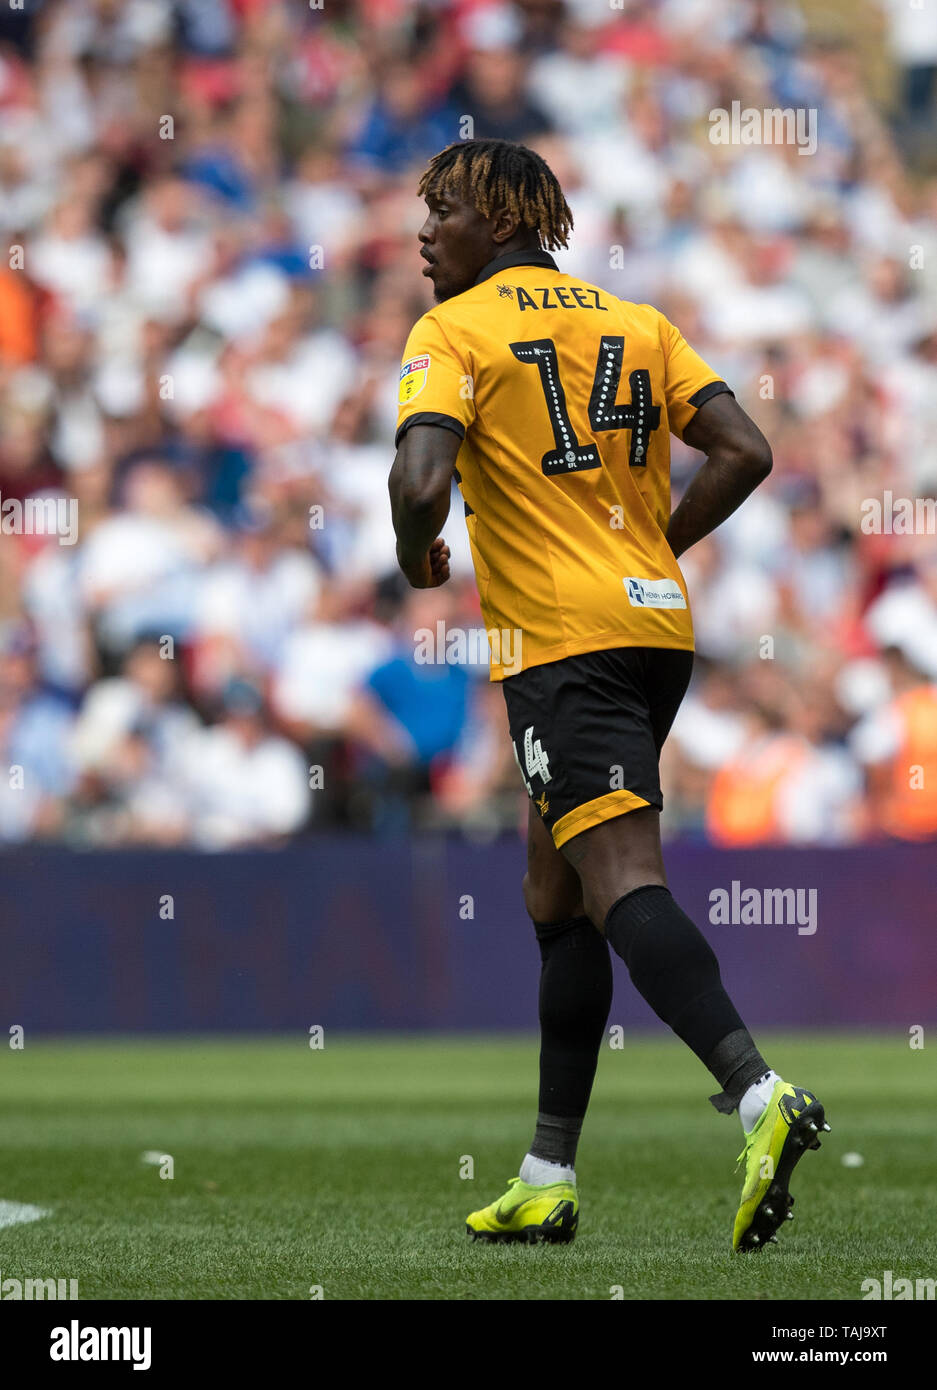 London, UK. 25th May, 2019. Adebayo Azeez of Newport County during the Sky Bet League 2 Play-Off FINAL match between Newport County and Tranmere Rovers at Wembley Stadium, London, England on 25 May 2019. Photo by Andy Rowland. Credit: PRiME Media Images/Alamy Live News Stock Photo